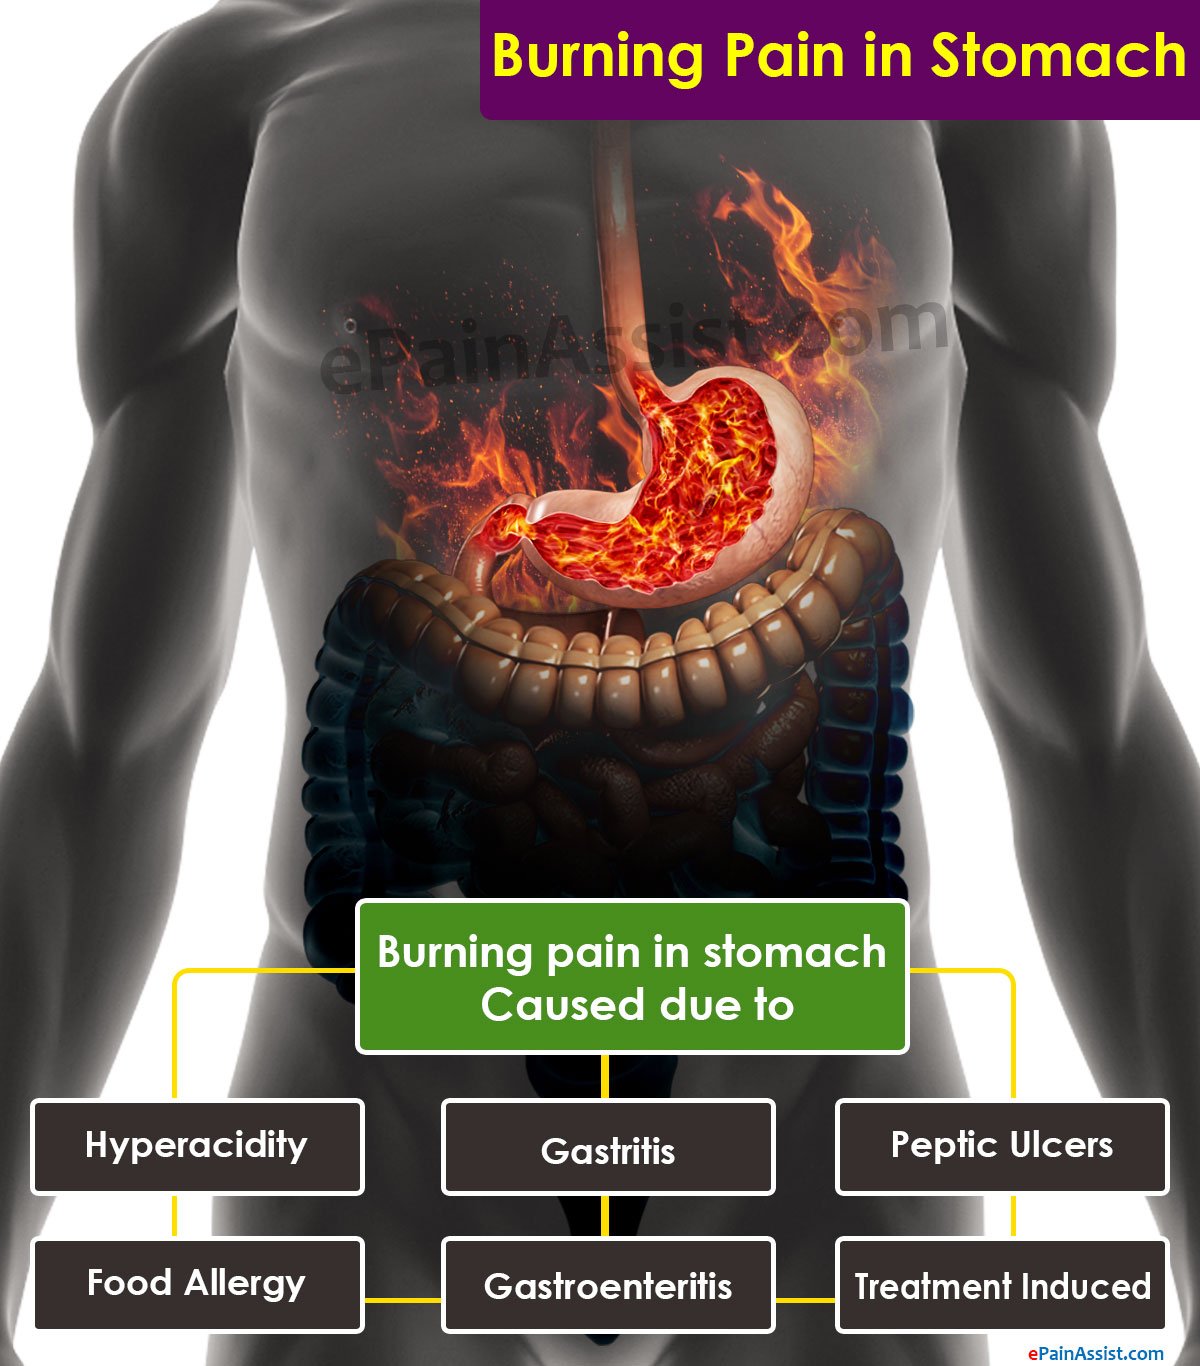 What Can Cause Burning Pain in Stomach?